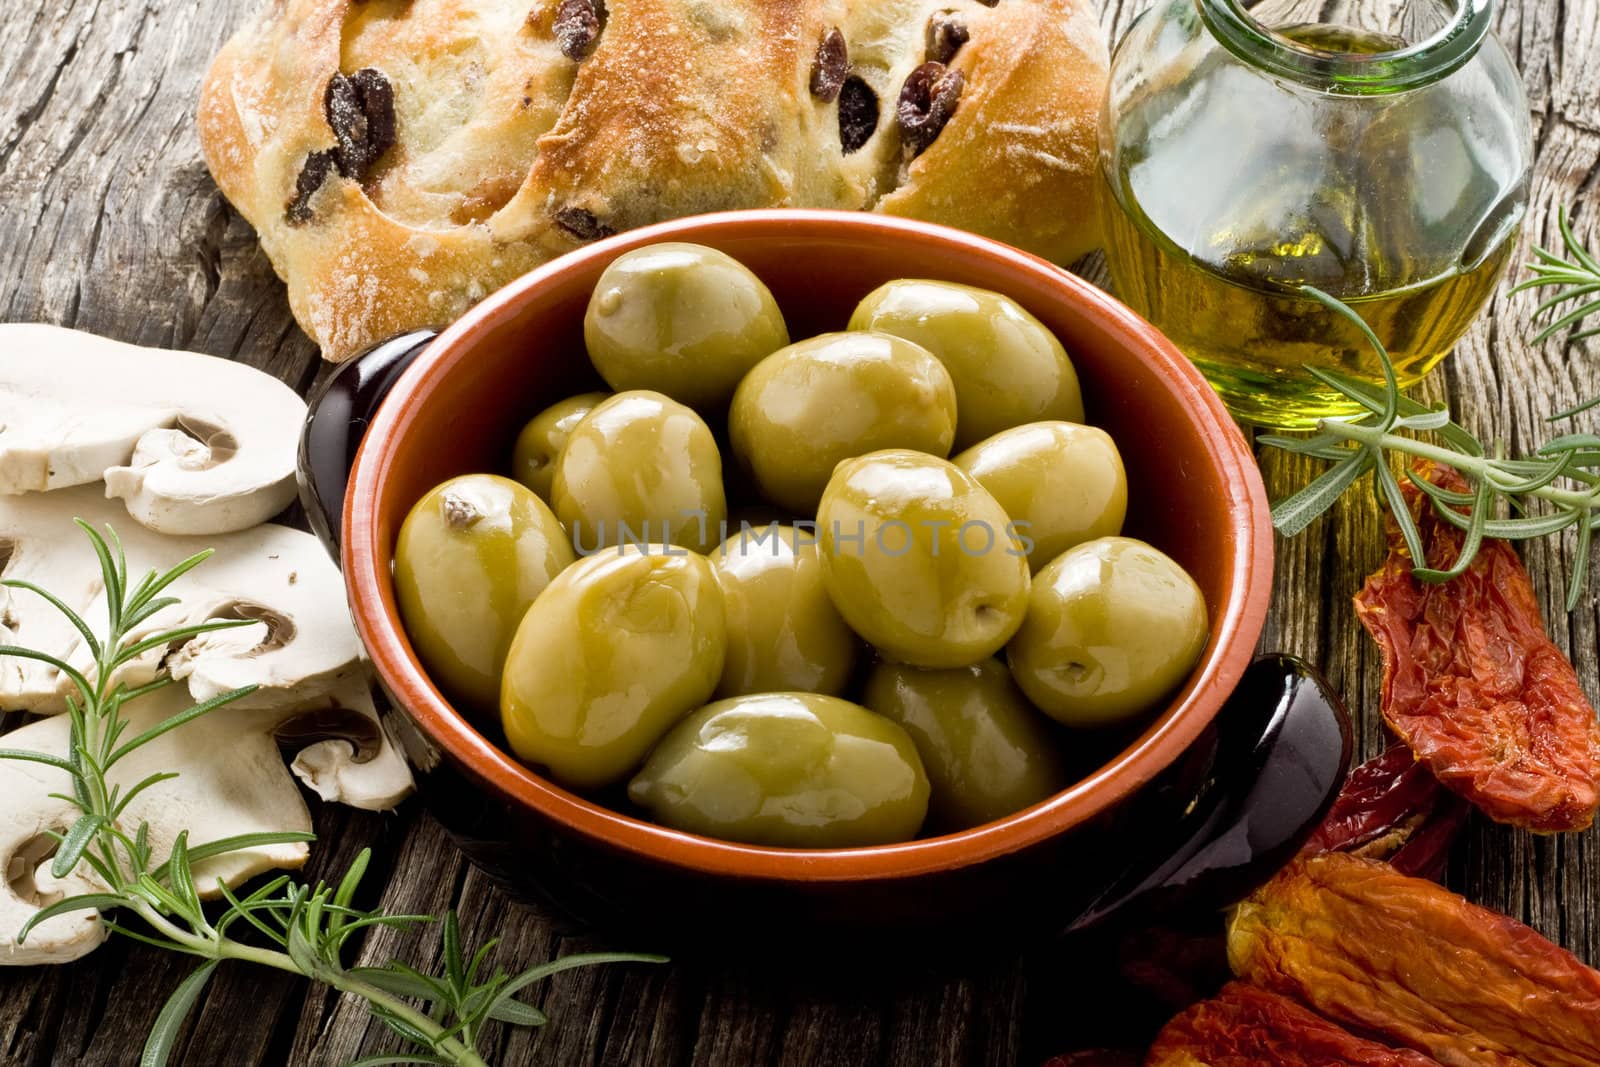 rustic appetizer with giants Spanish olives on a bowl 